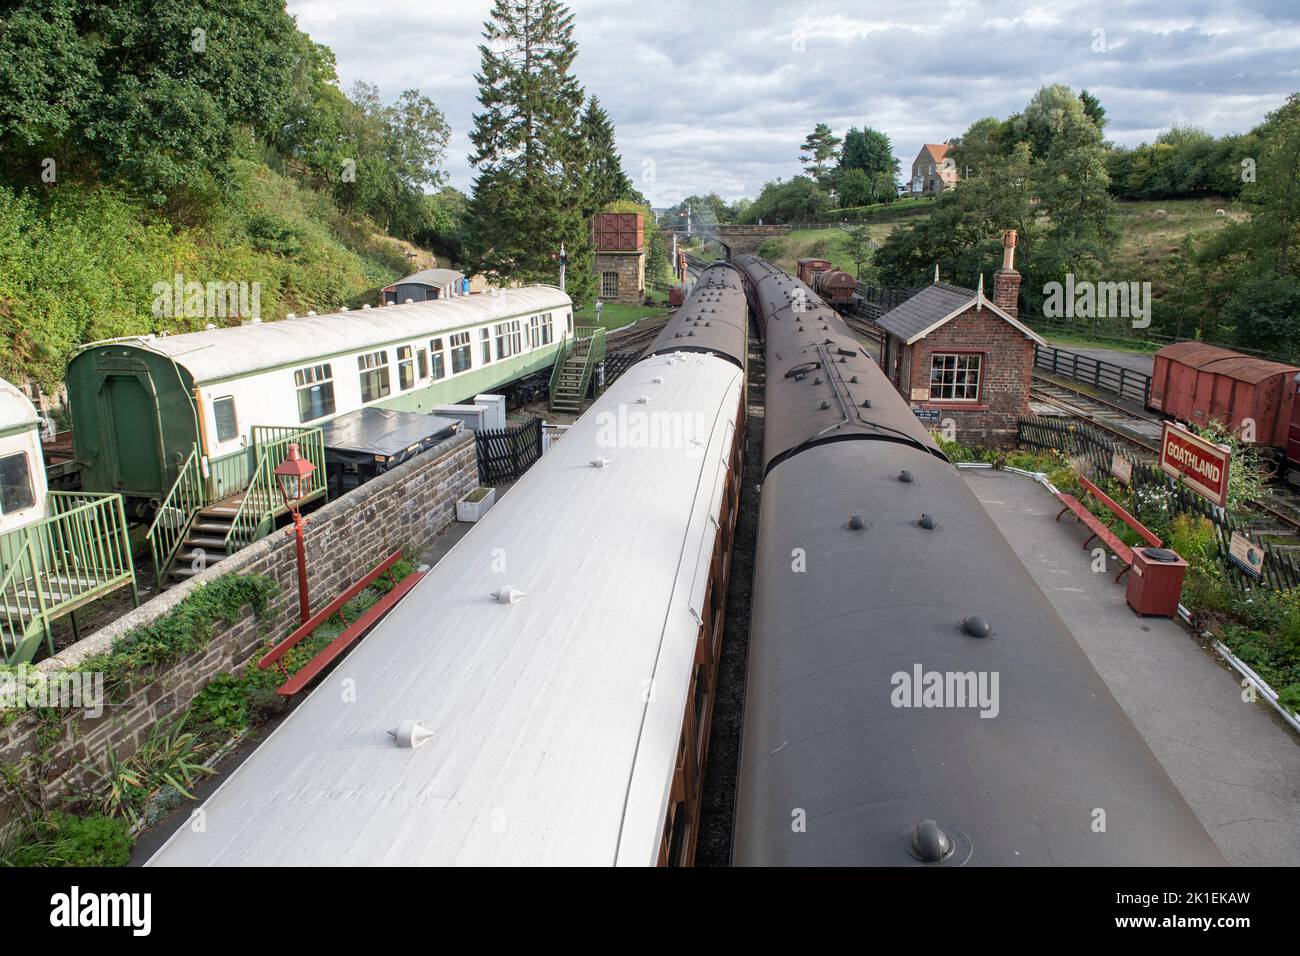 Steam trains in the station on the North York Moors railway at Goathland Stock Photo